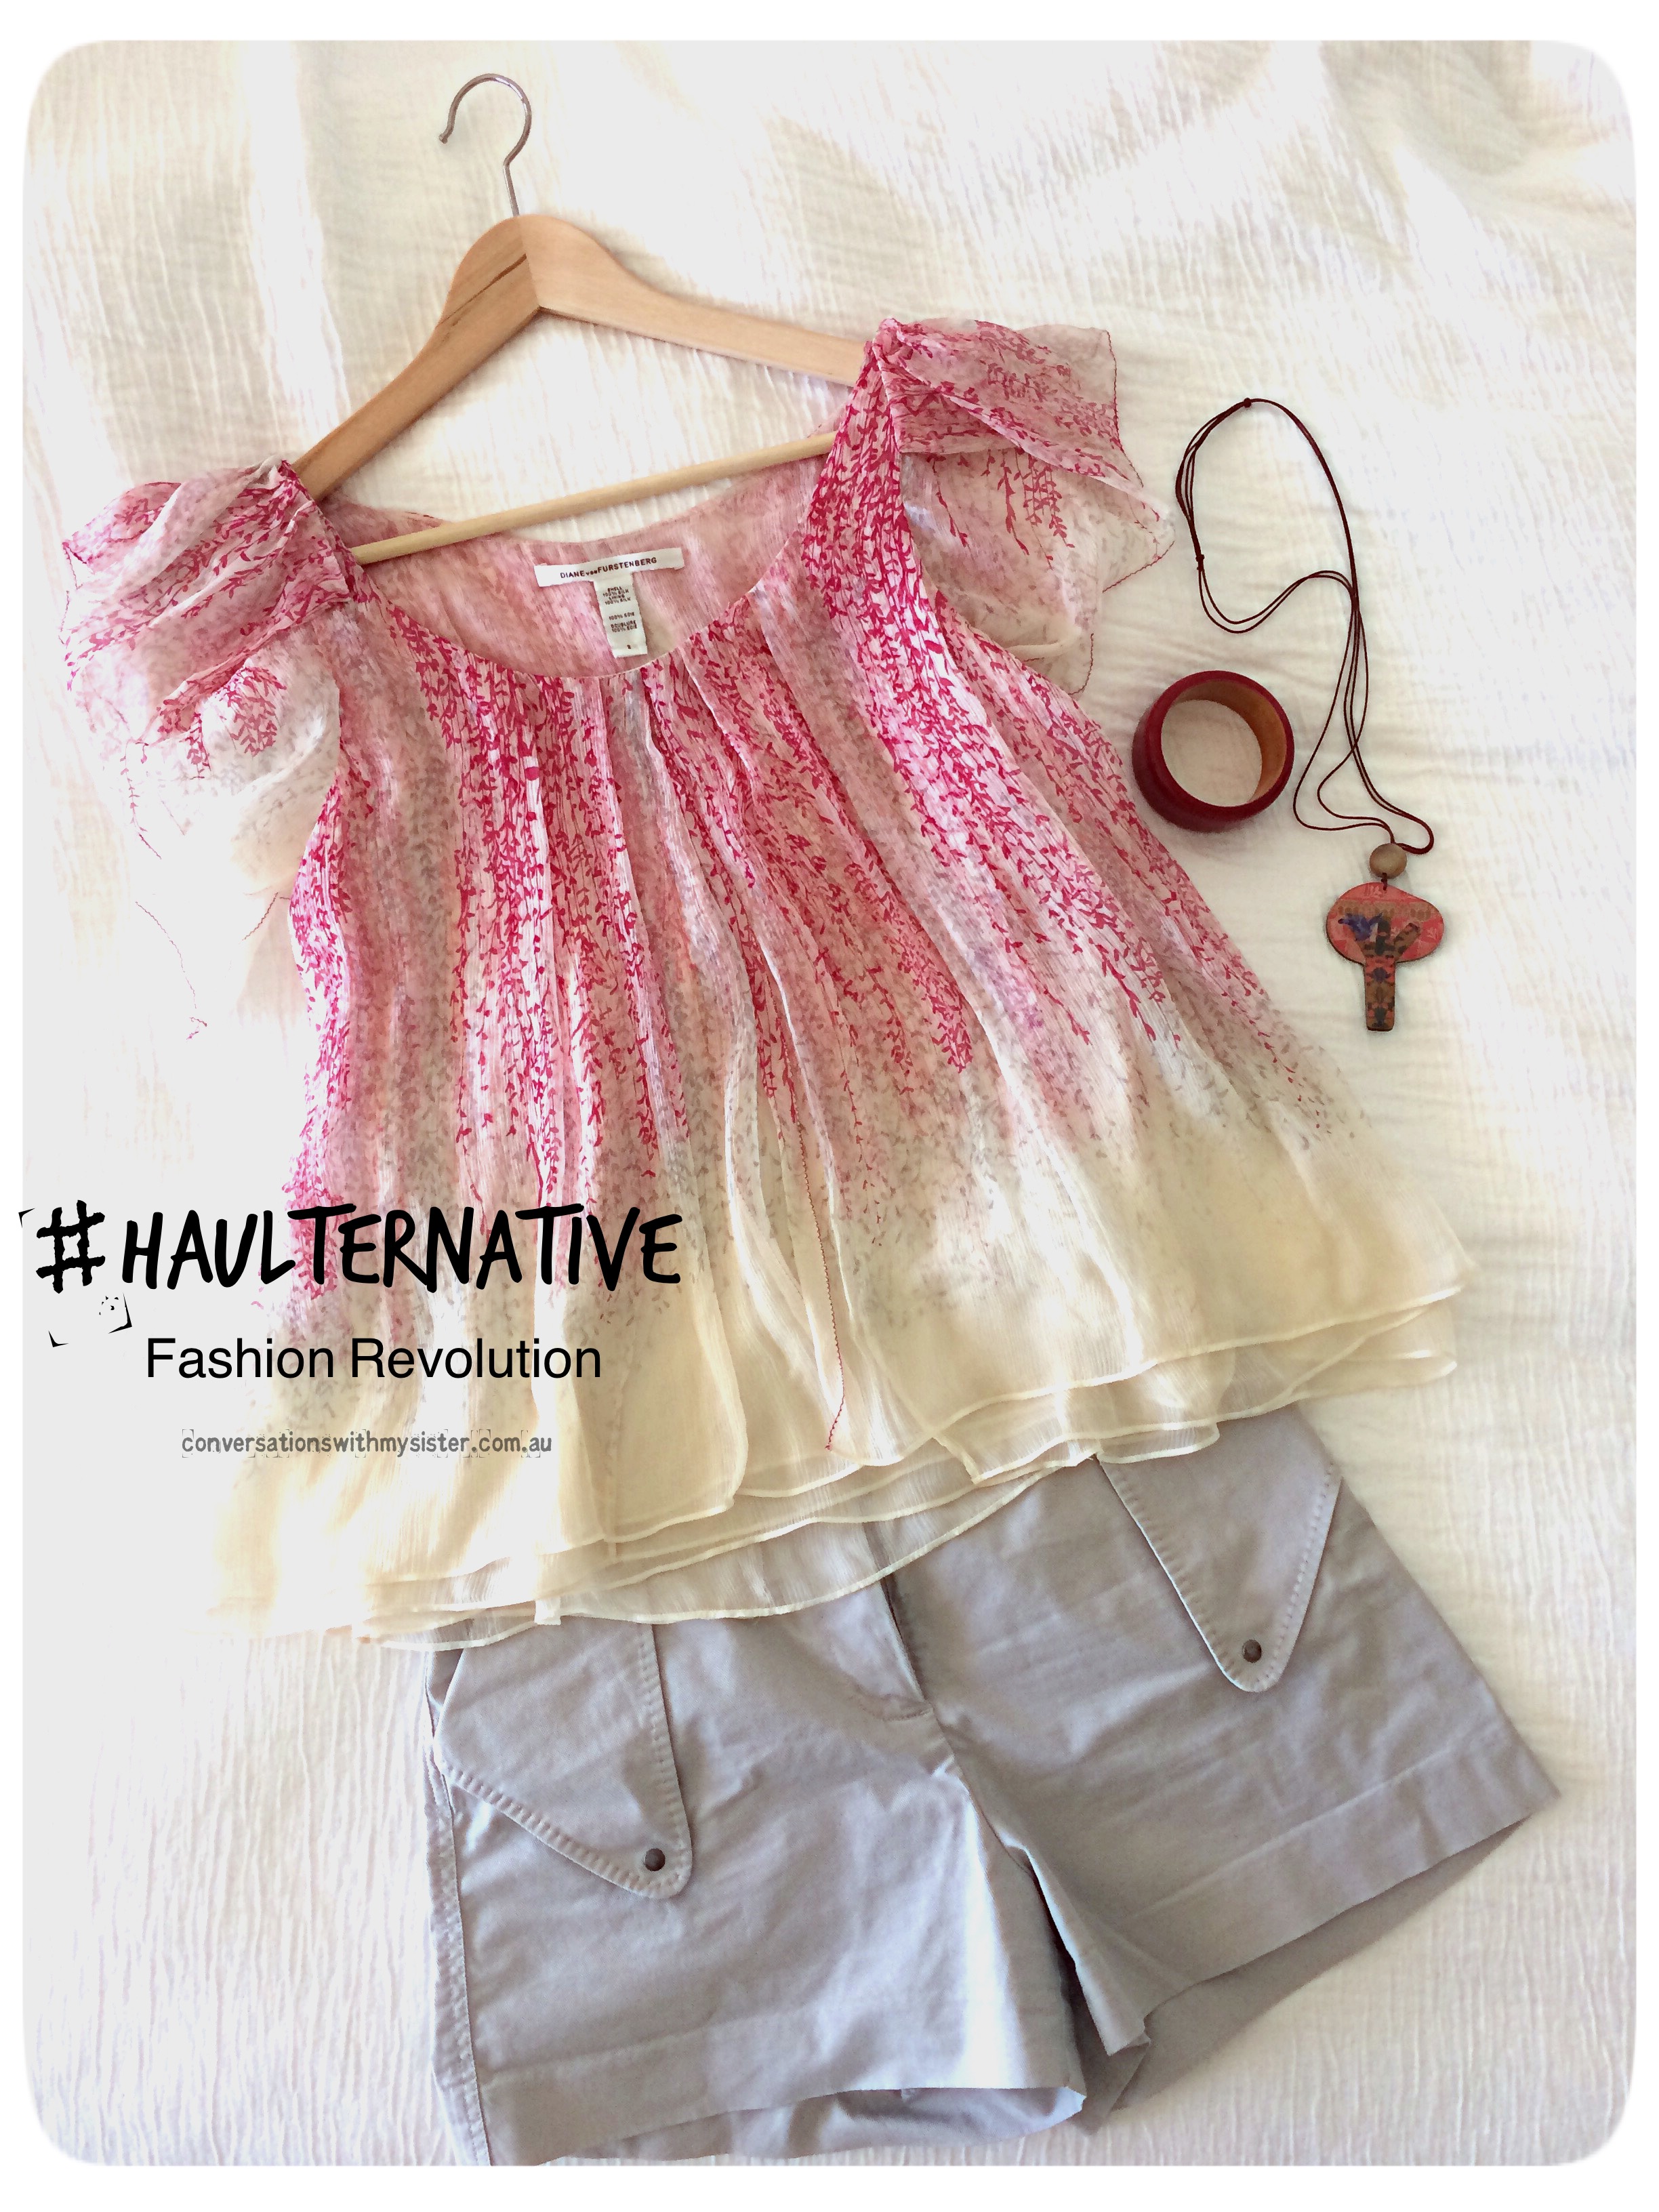 It's Fashion Revolution Week and this year I would like to share a selection of '2hand' outfits in support of their '#haulternative' campaign. An initiative designed to start conversations around fun, practical and environmentally friendly alternatives to buying new, when your wardrobe needs refreshing.